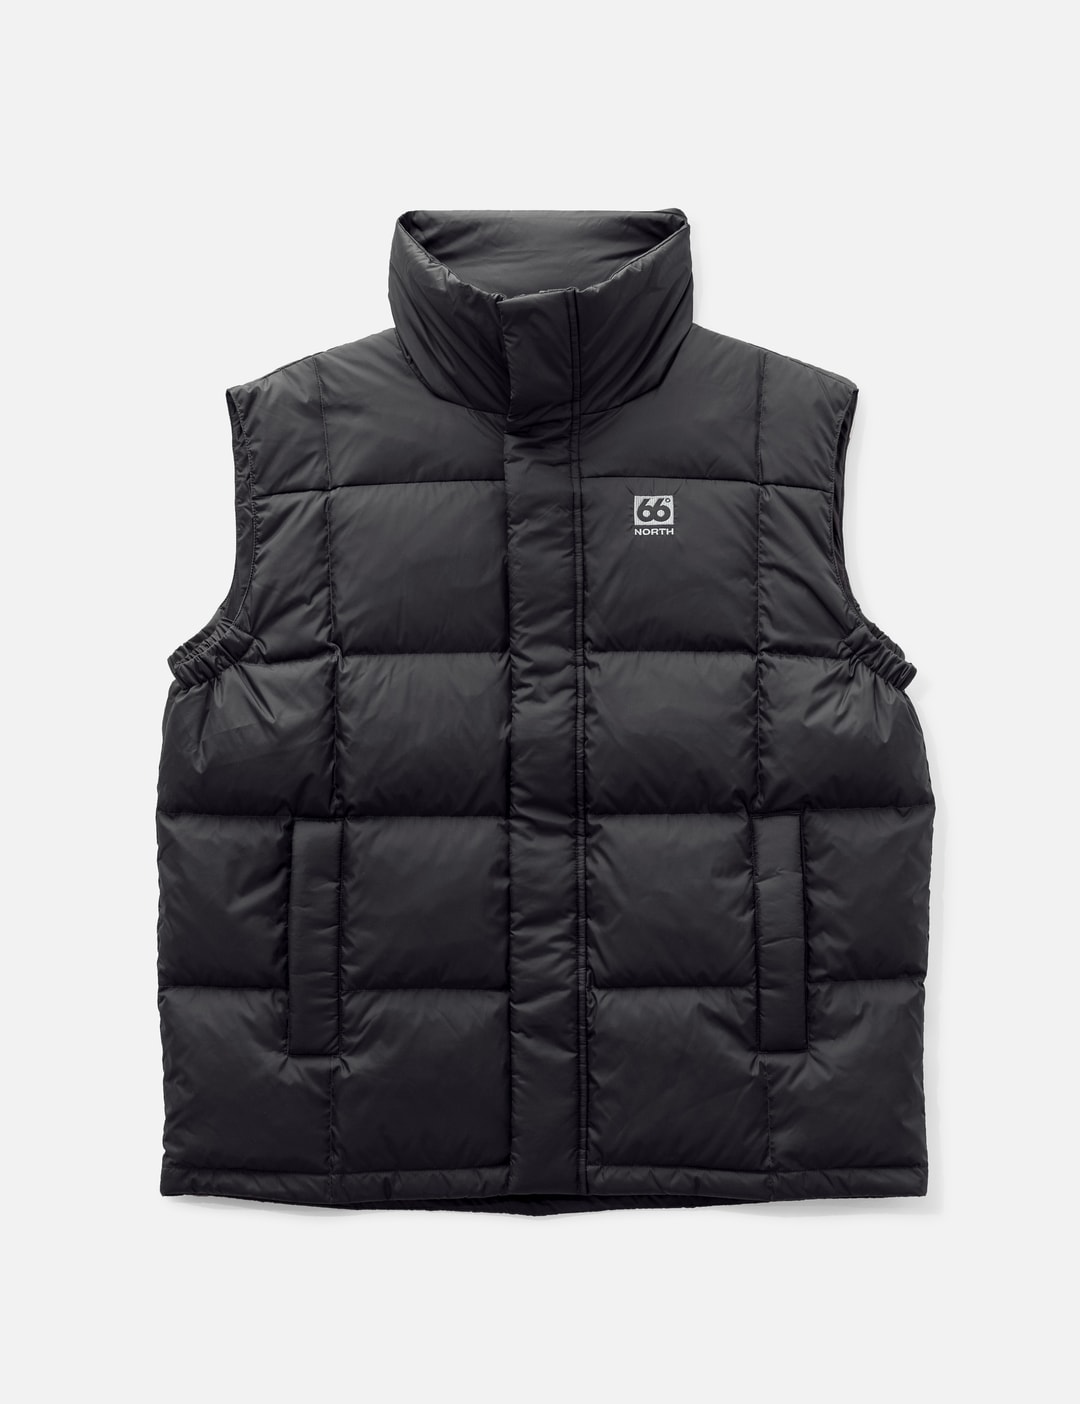 66°North - Dyngja Down Vest | HBX - Globally Curated Fashion and ...